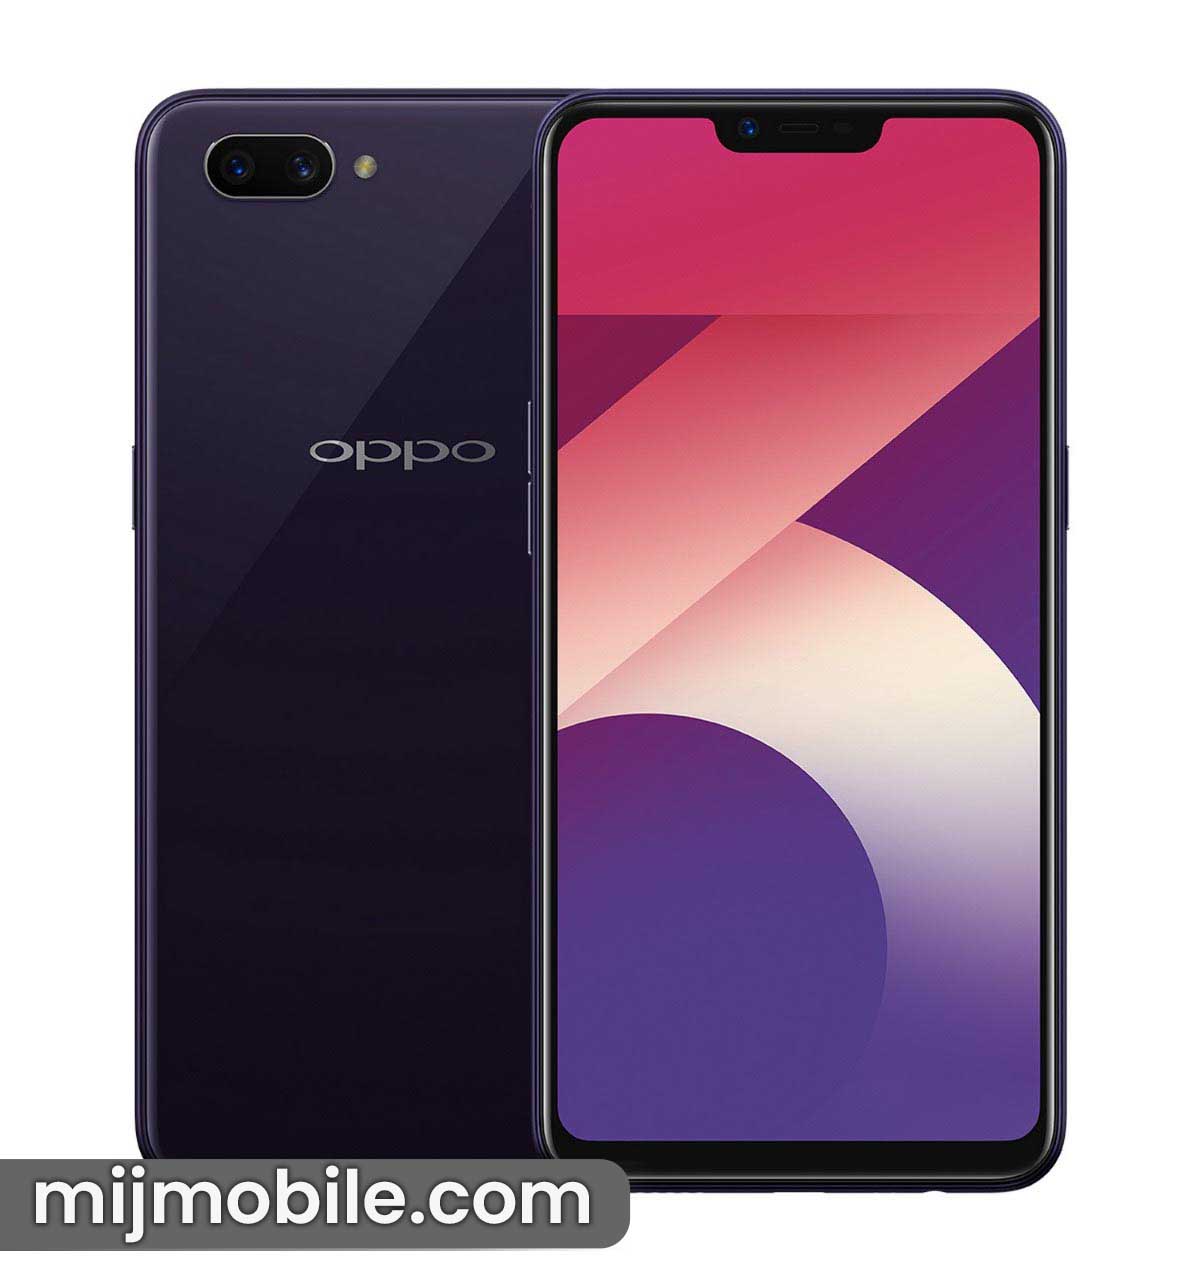 Oppo A3s Price in Pakistan & Specifications Oppo A3s Price in Pakistan is only 18,999.